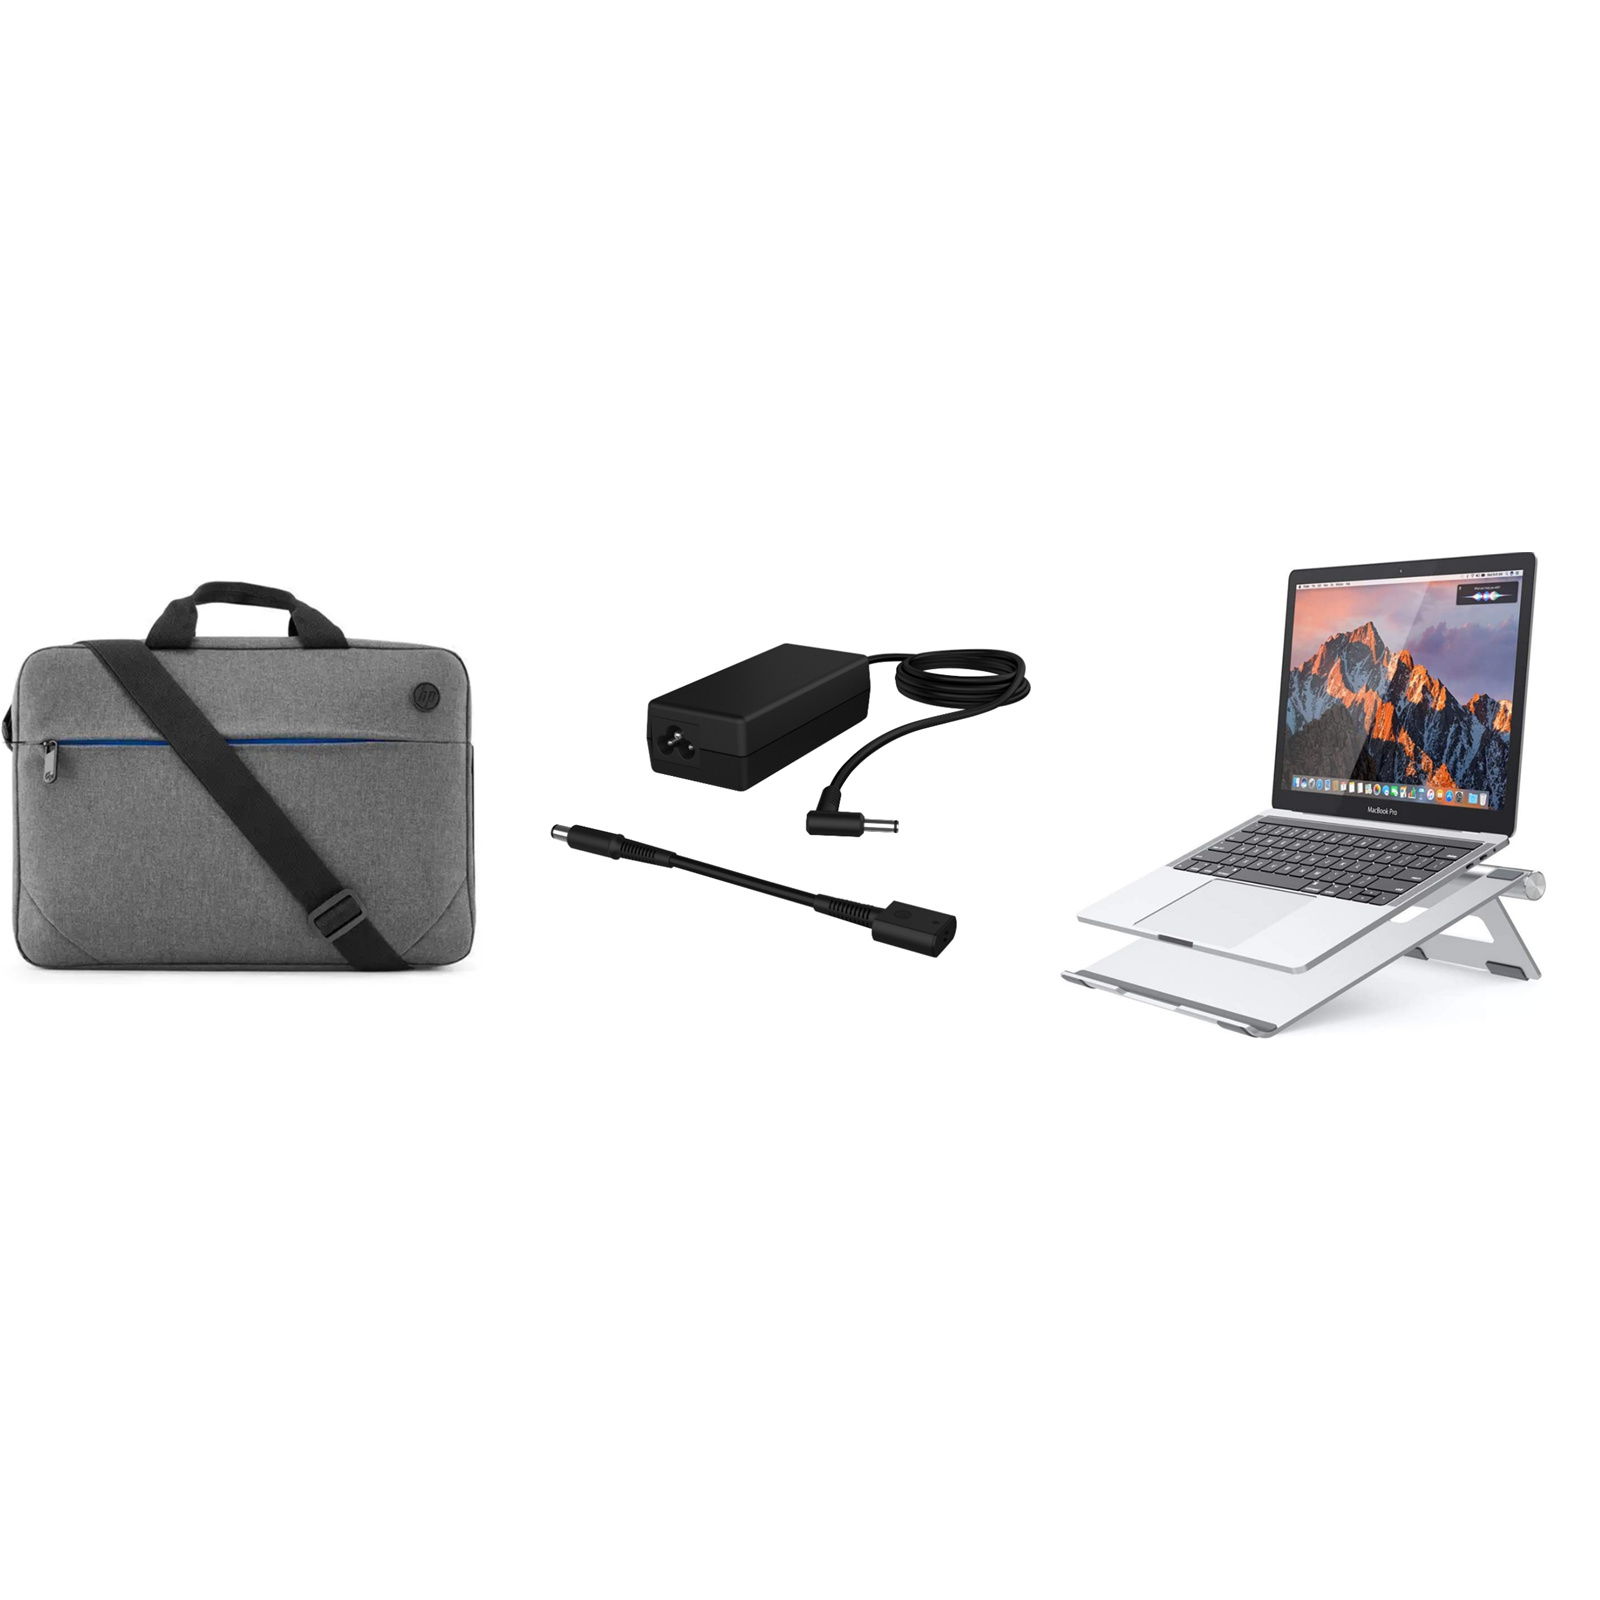 HP Essential Travel Pack - Bundle Included - 14-15.6" TopLoad Carry Bag - HP 65W Blue Tip Travel Charger - Foldable Aluminium Laptop Stand - NZ DEPOT